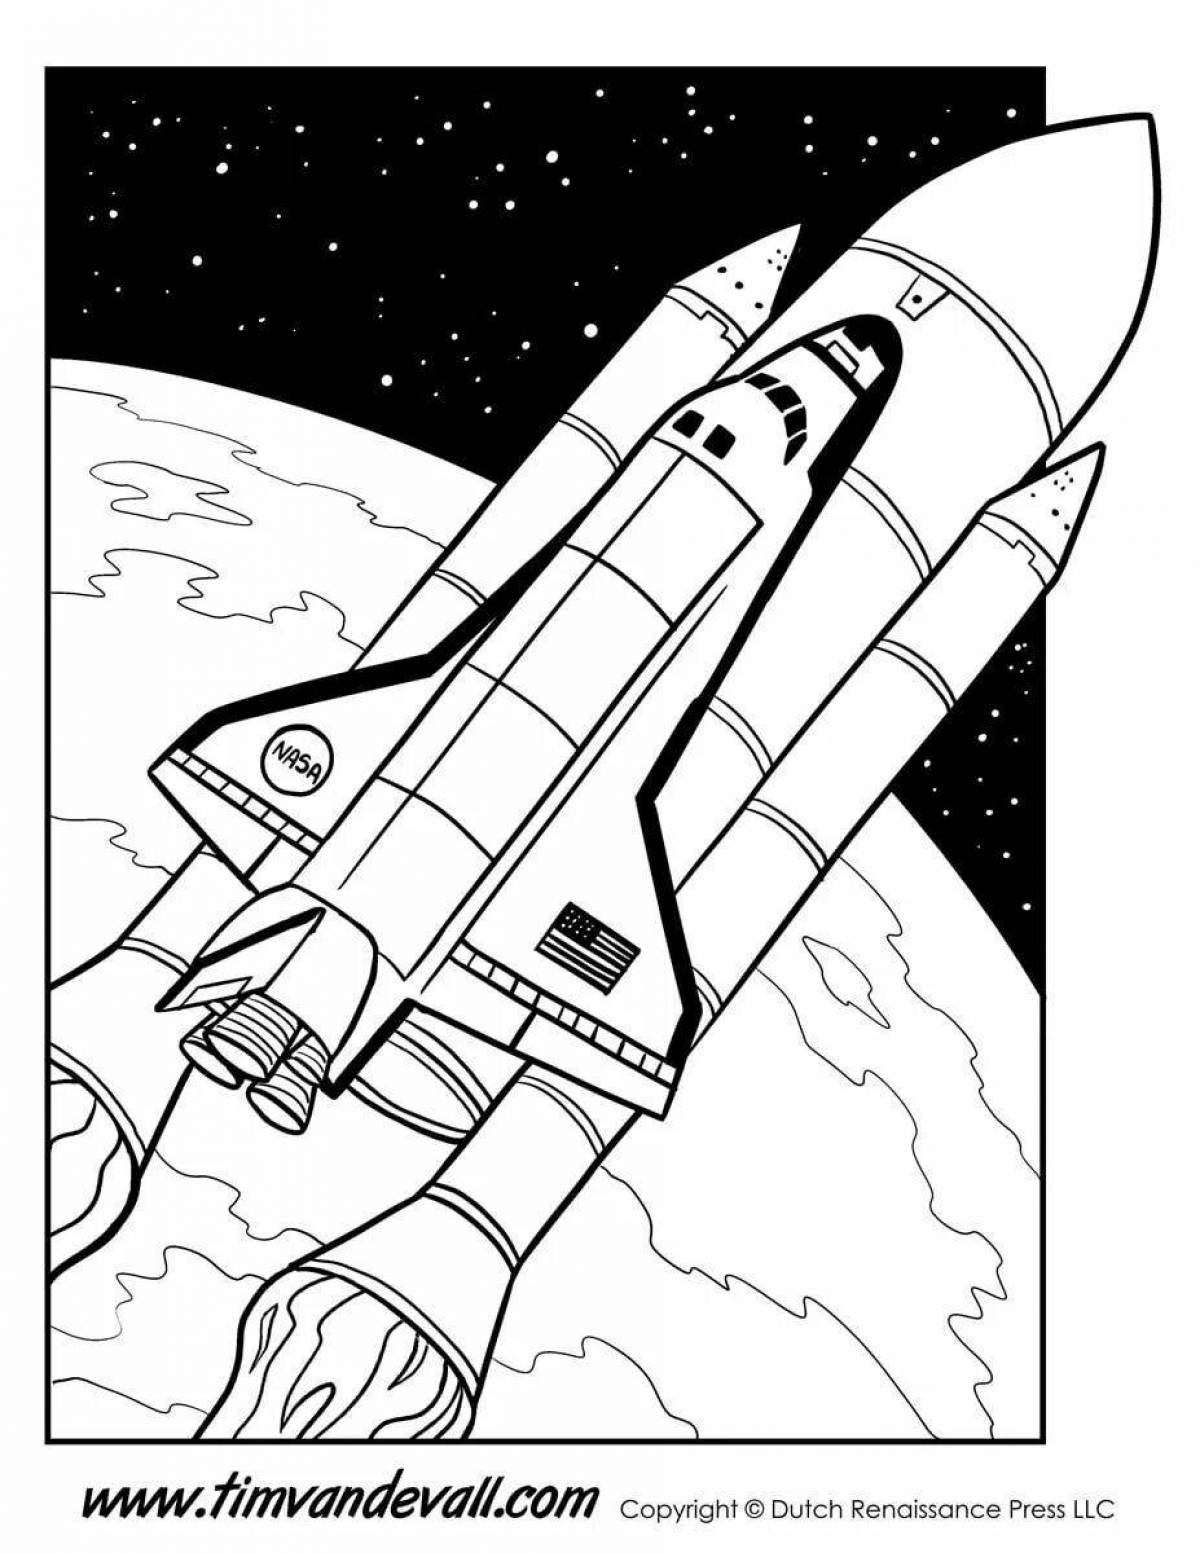 Charming space coloring book